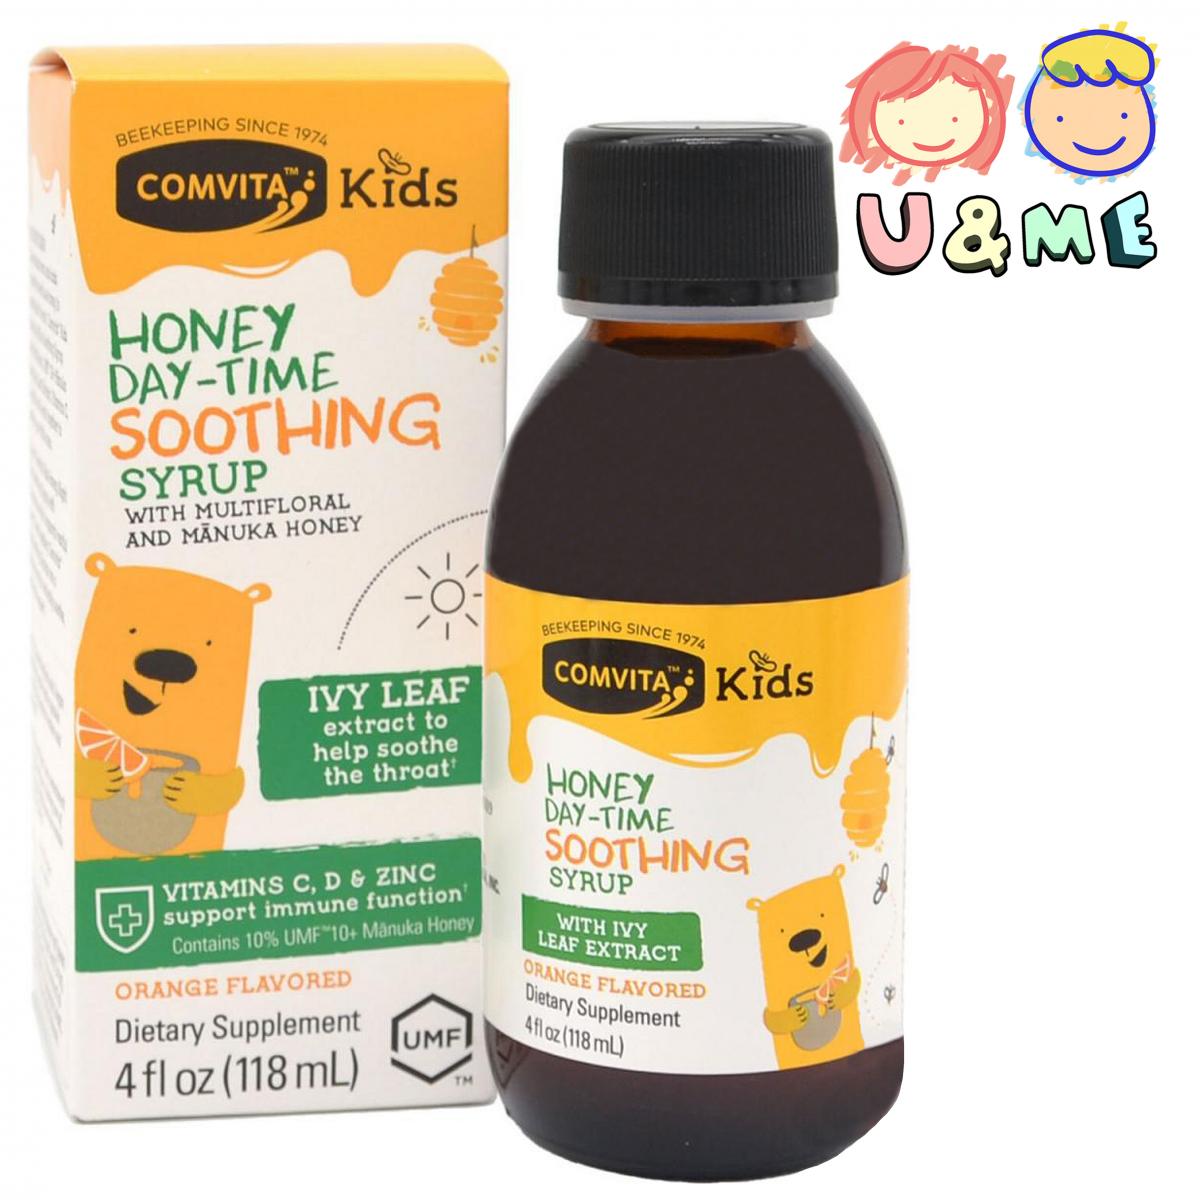 Kids Manuka Honey Day-Time Soothing Syrup 118ml - Green (Parallel Import)